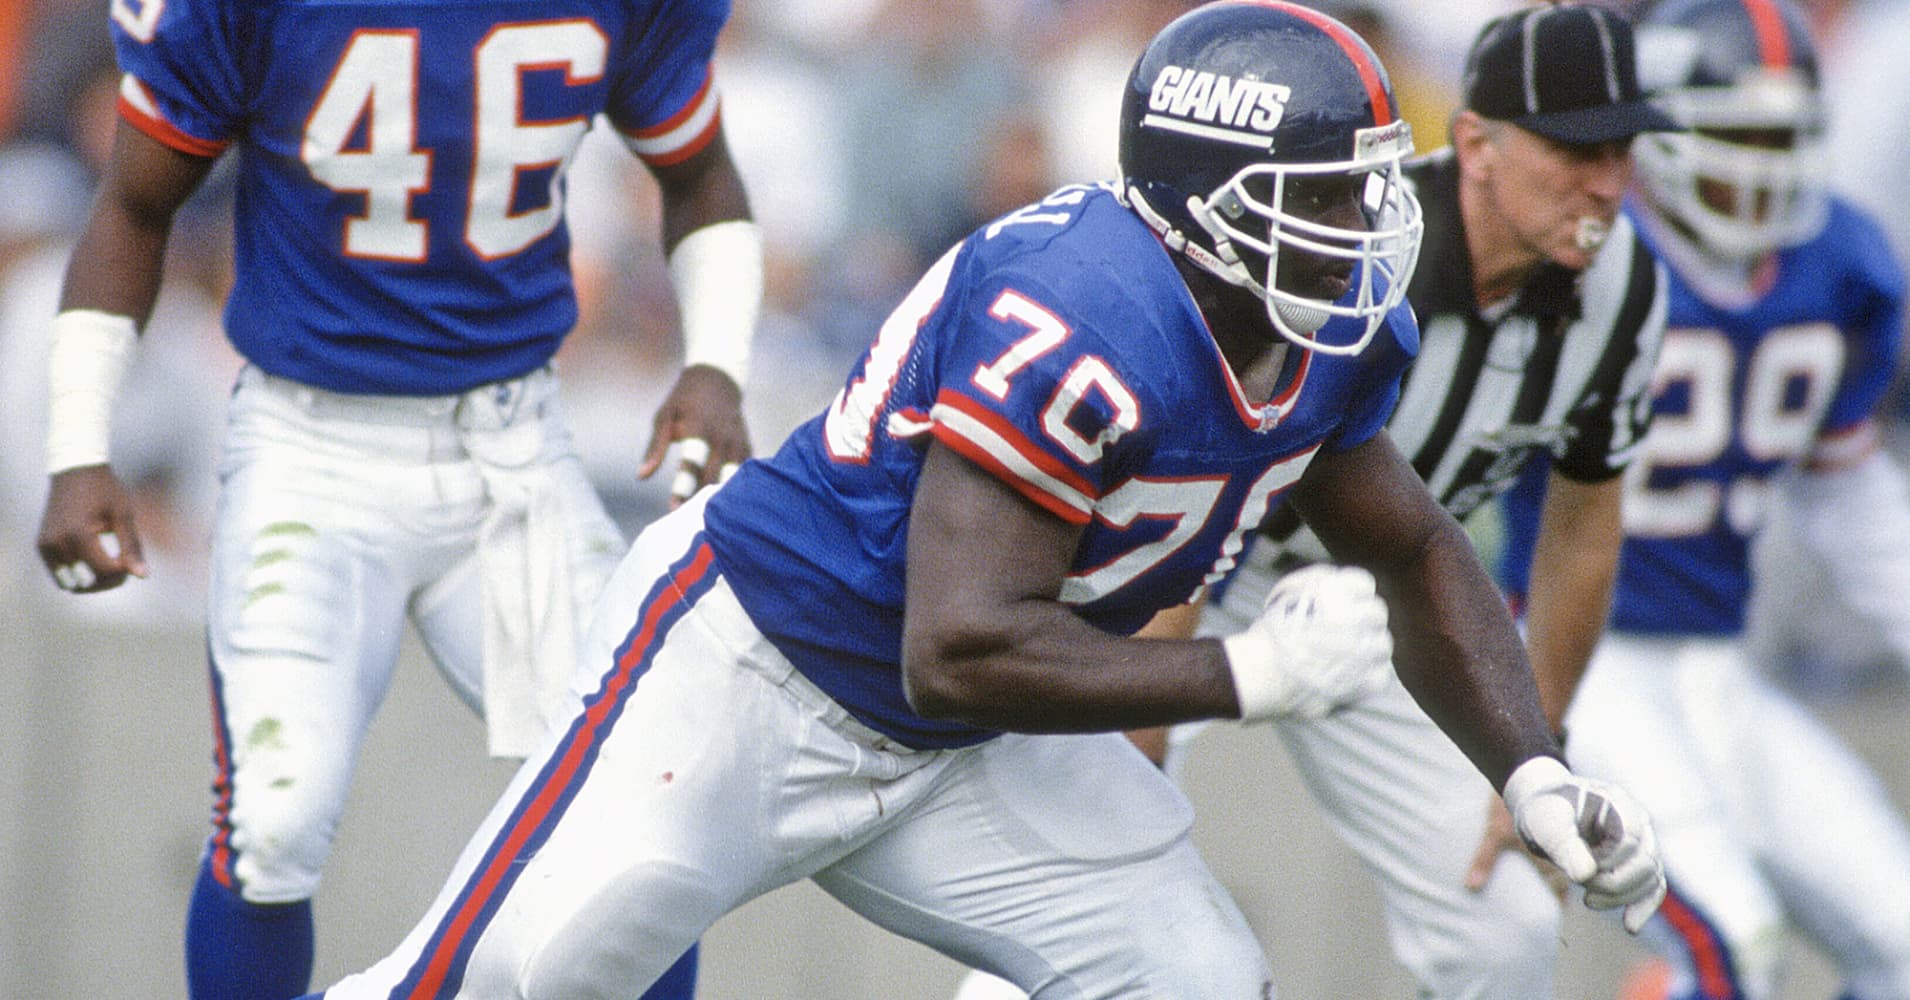 NFL pro Leonard Marshall looks to keep players from going broke